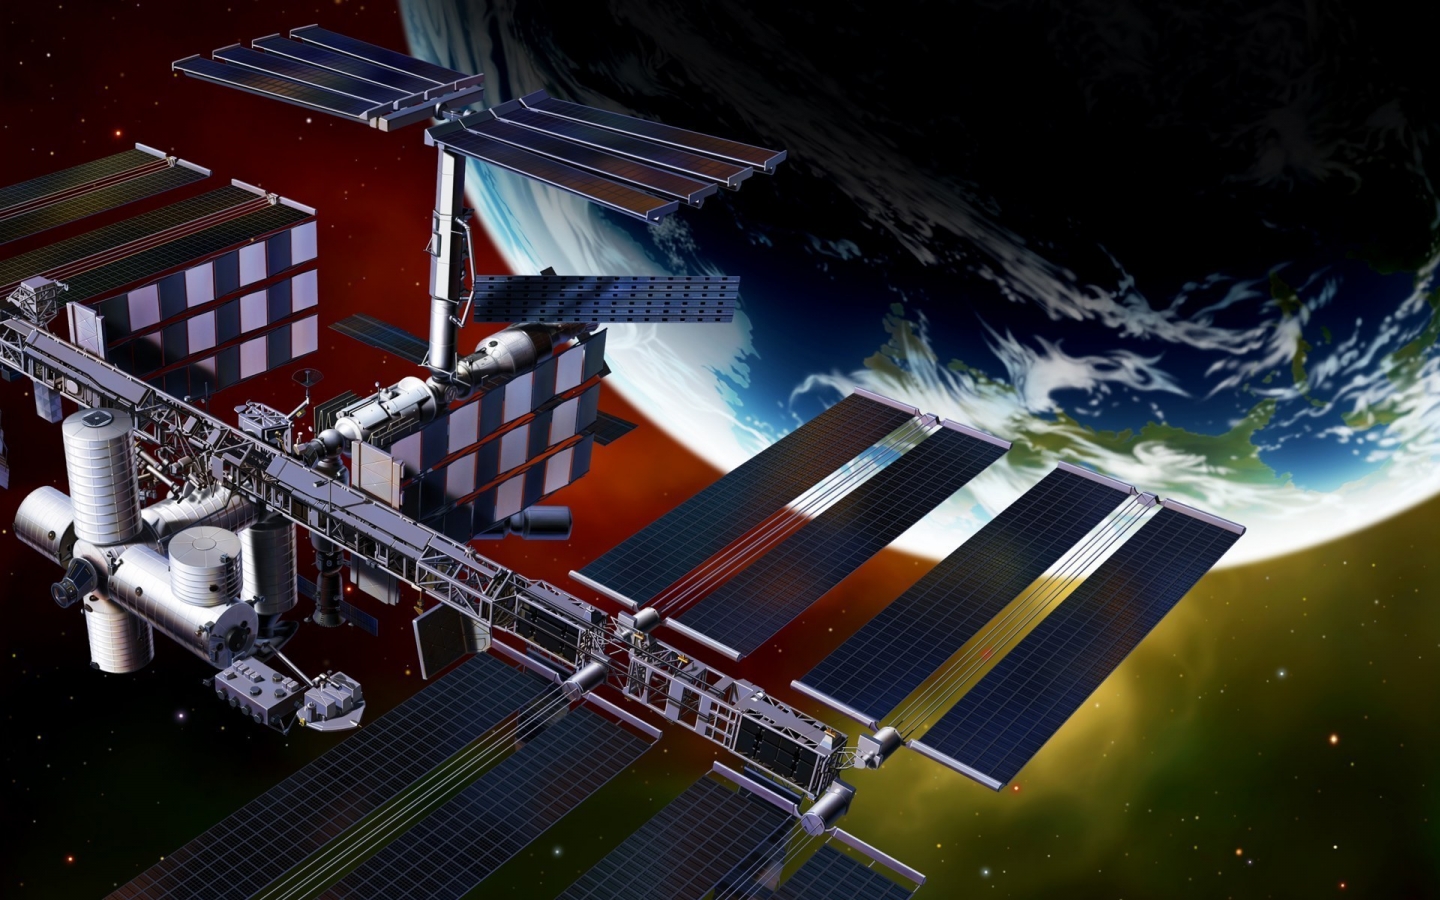 Earth Orbit Station for 1440 x 900 widescreen resolution